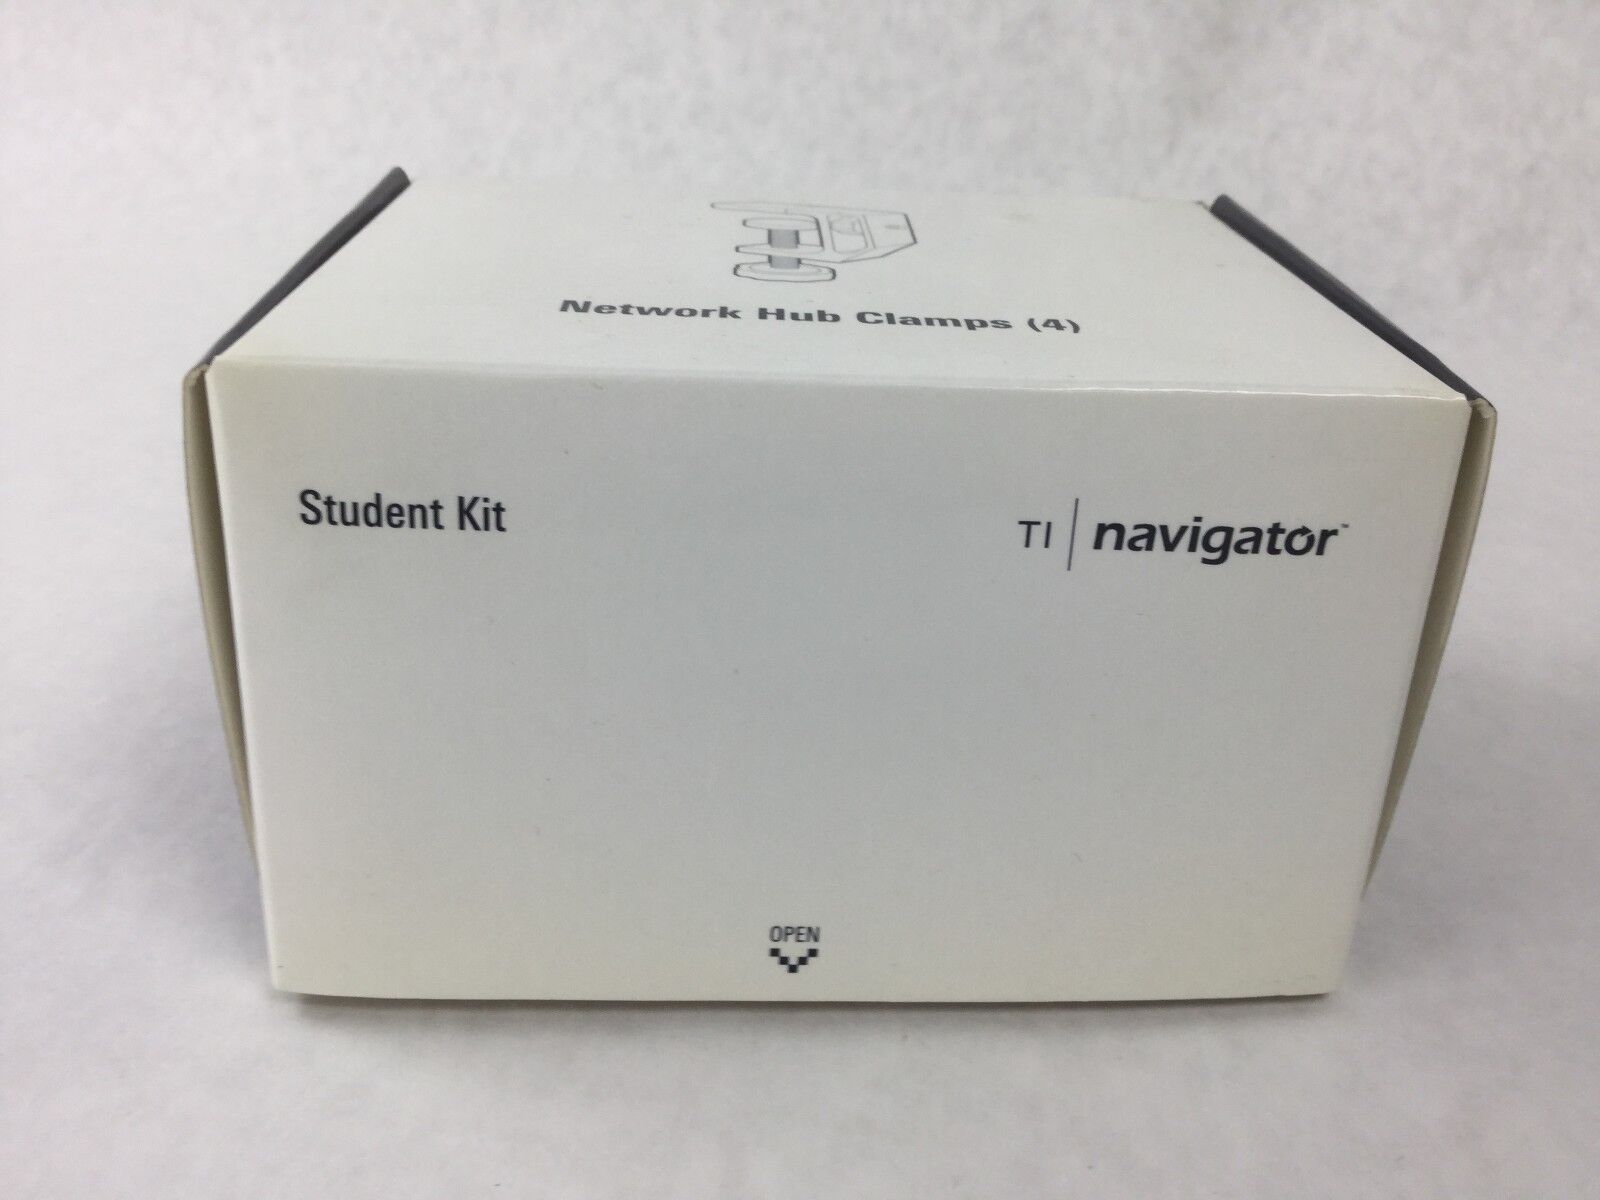 Texas Instruments TI-Navigator Network Hub clamps, NEW in BOX (Lot of 4)